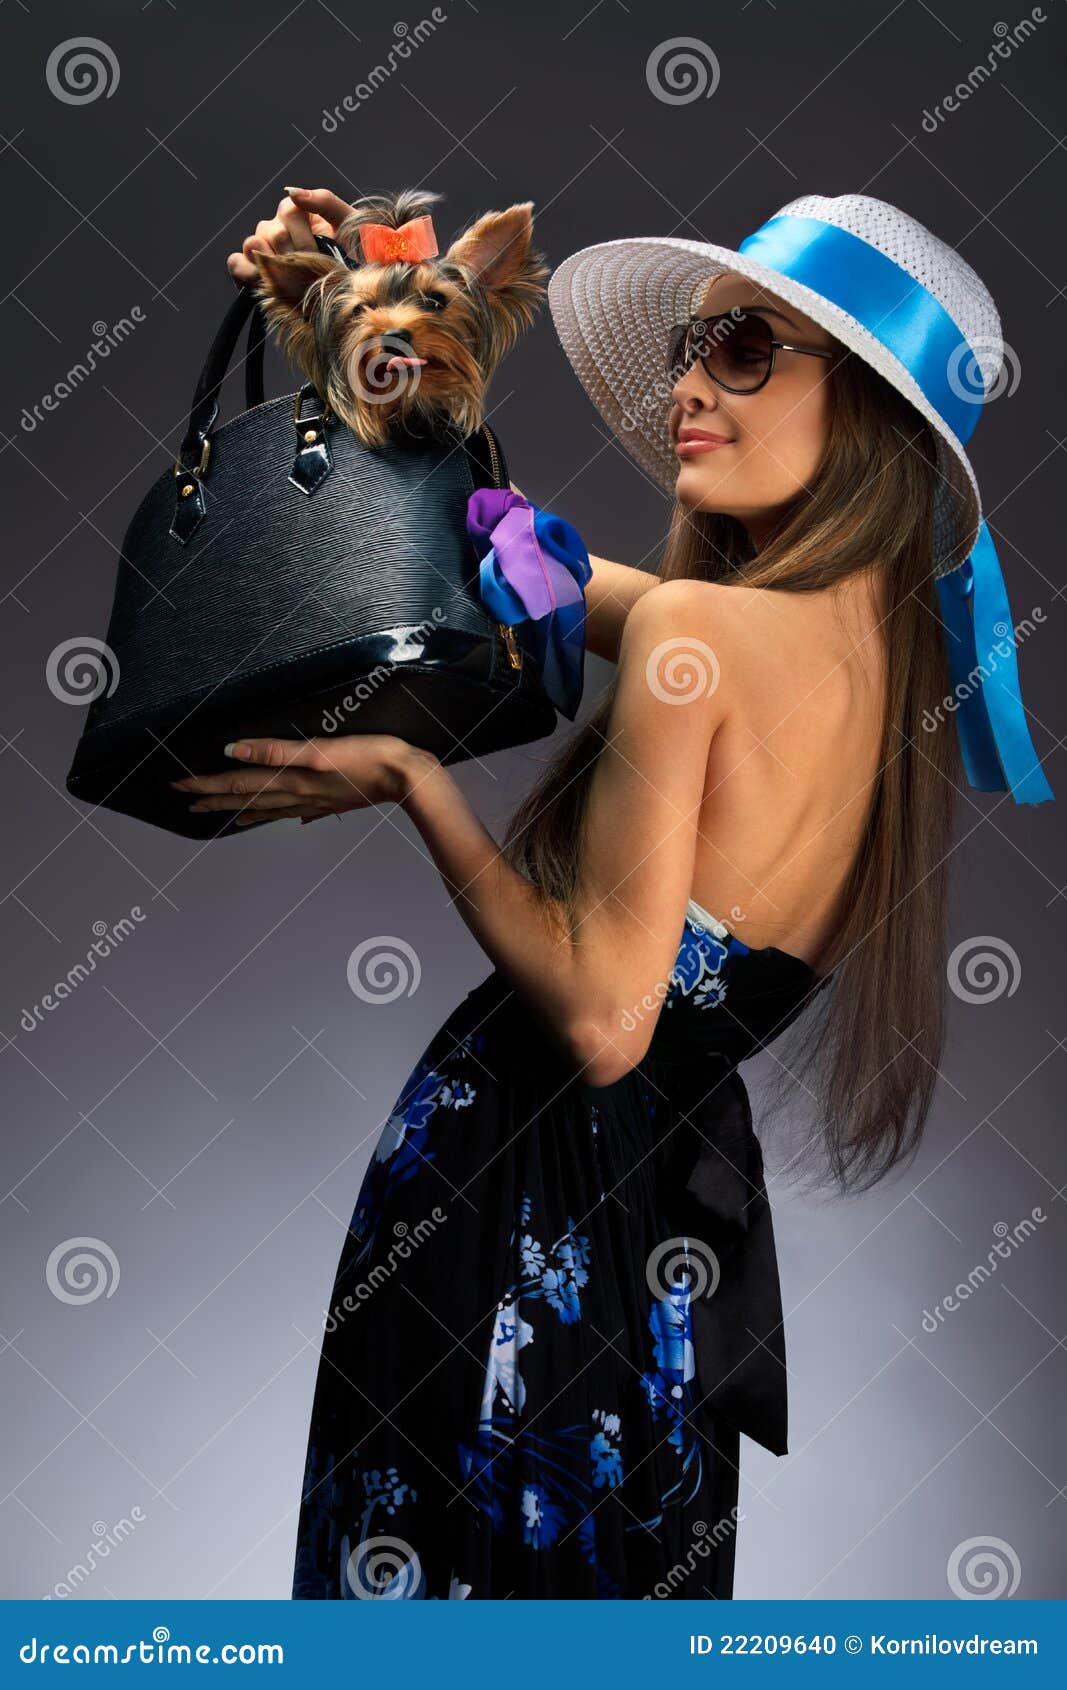 glamor woman with yorkshire terrier